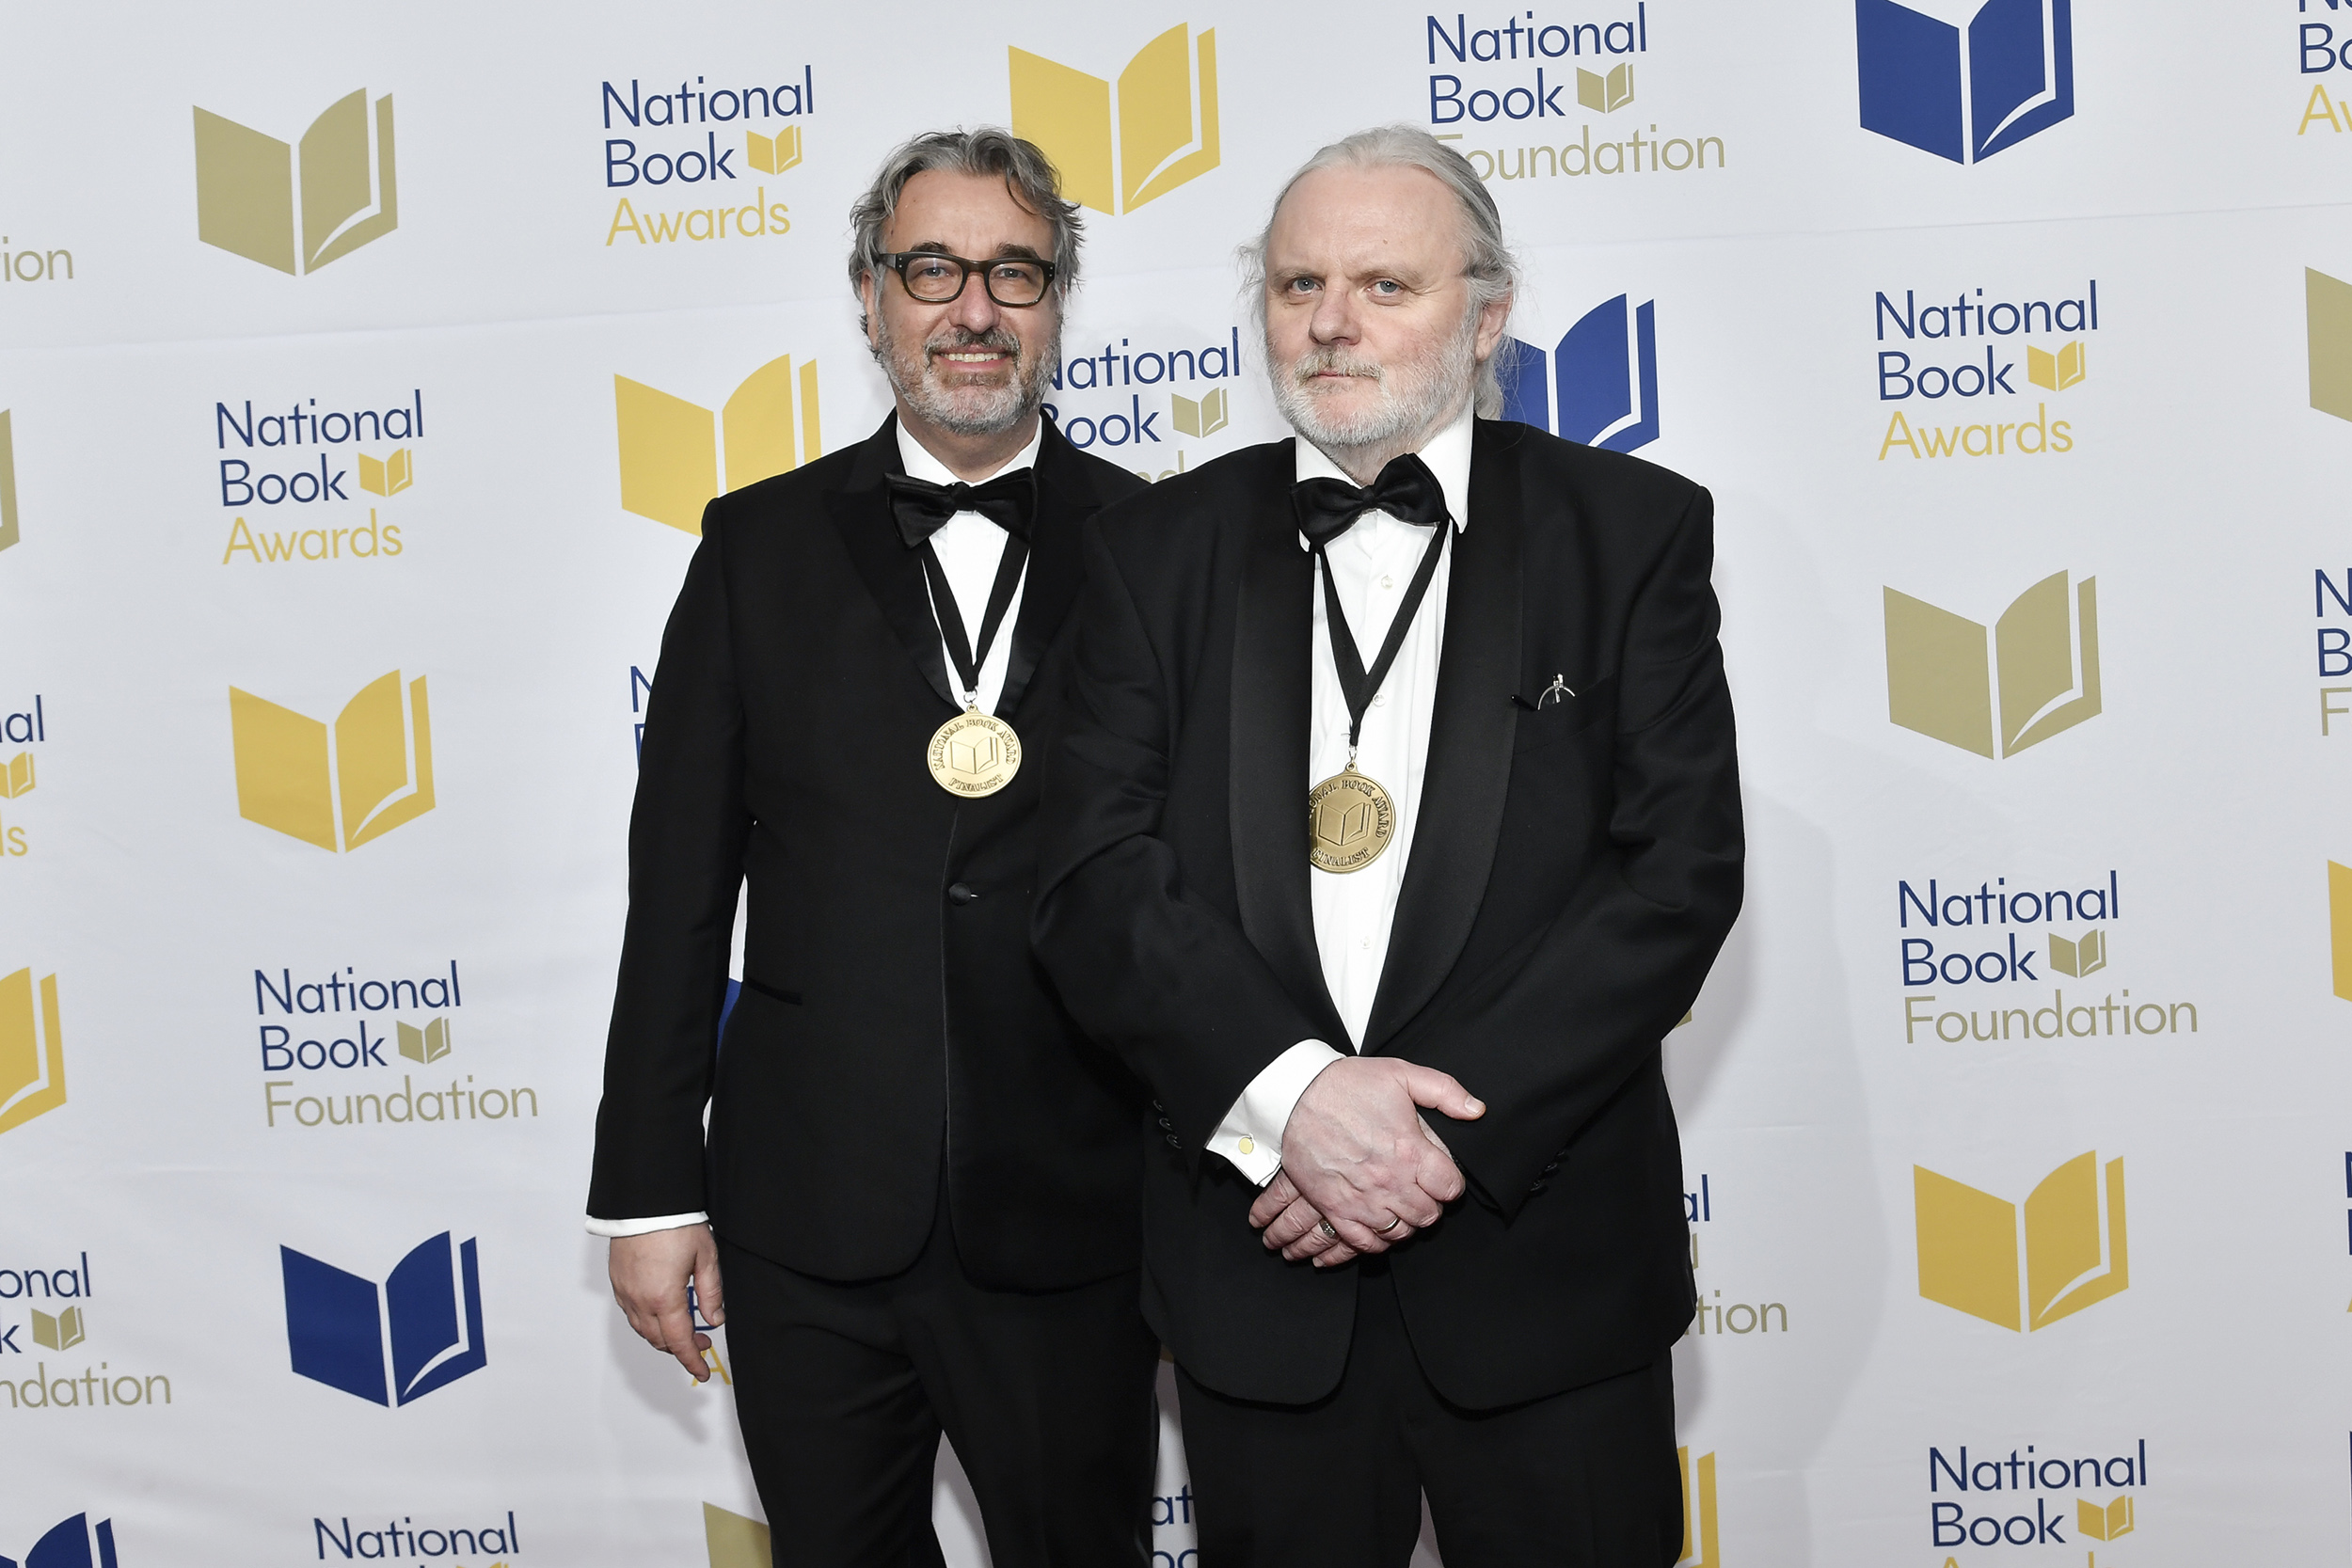 Damion Searls and Jon Fosse at the National Book Awards in 2022.